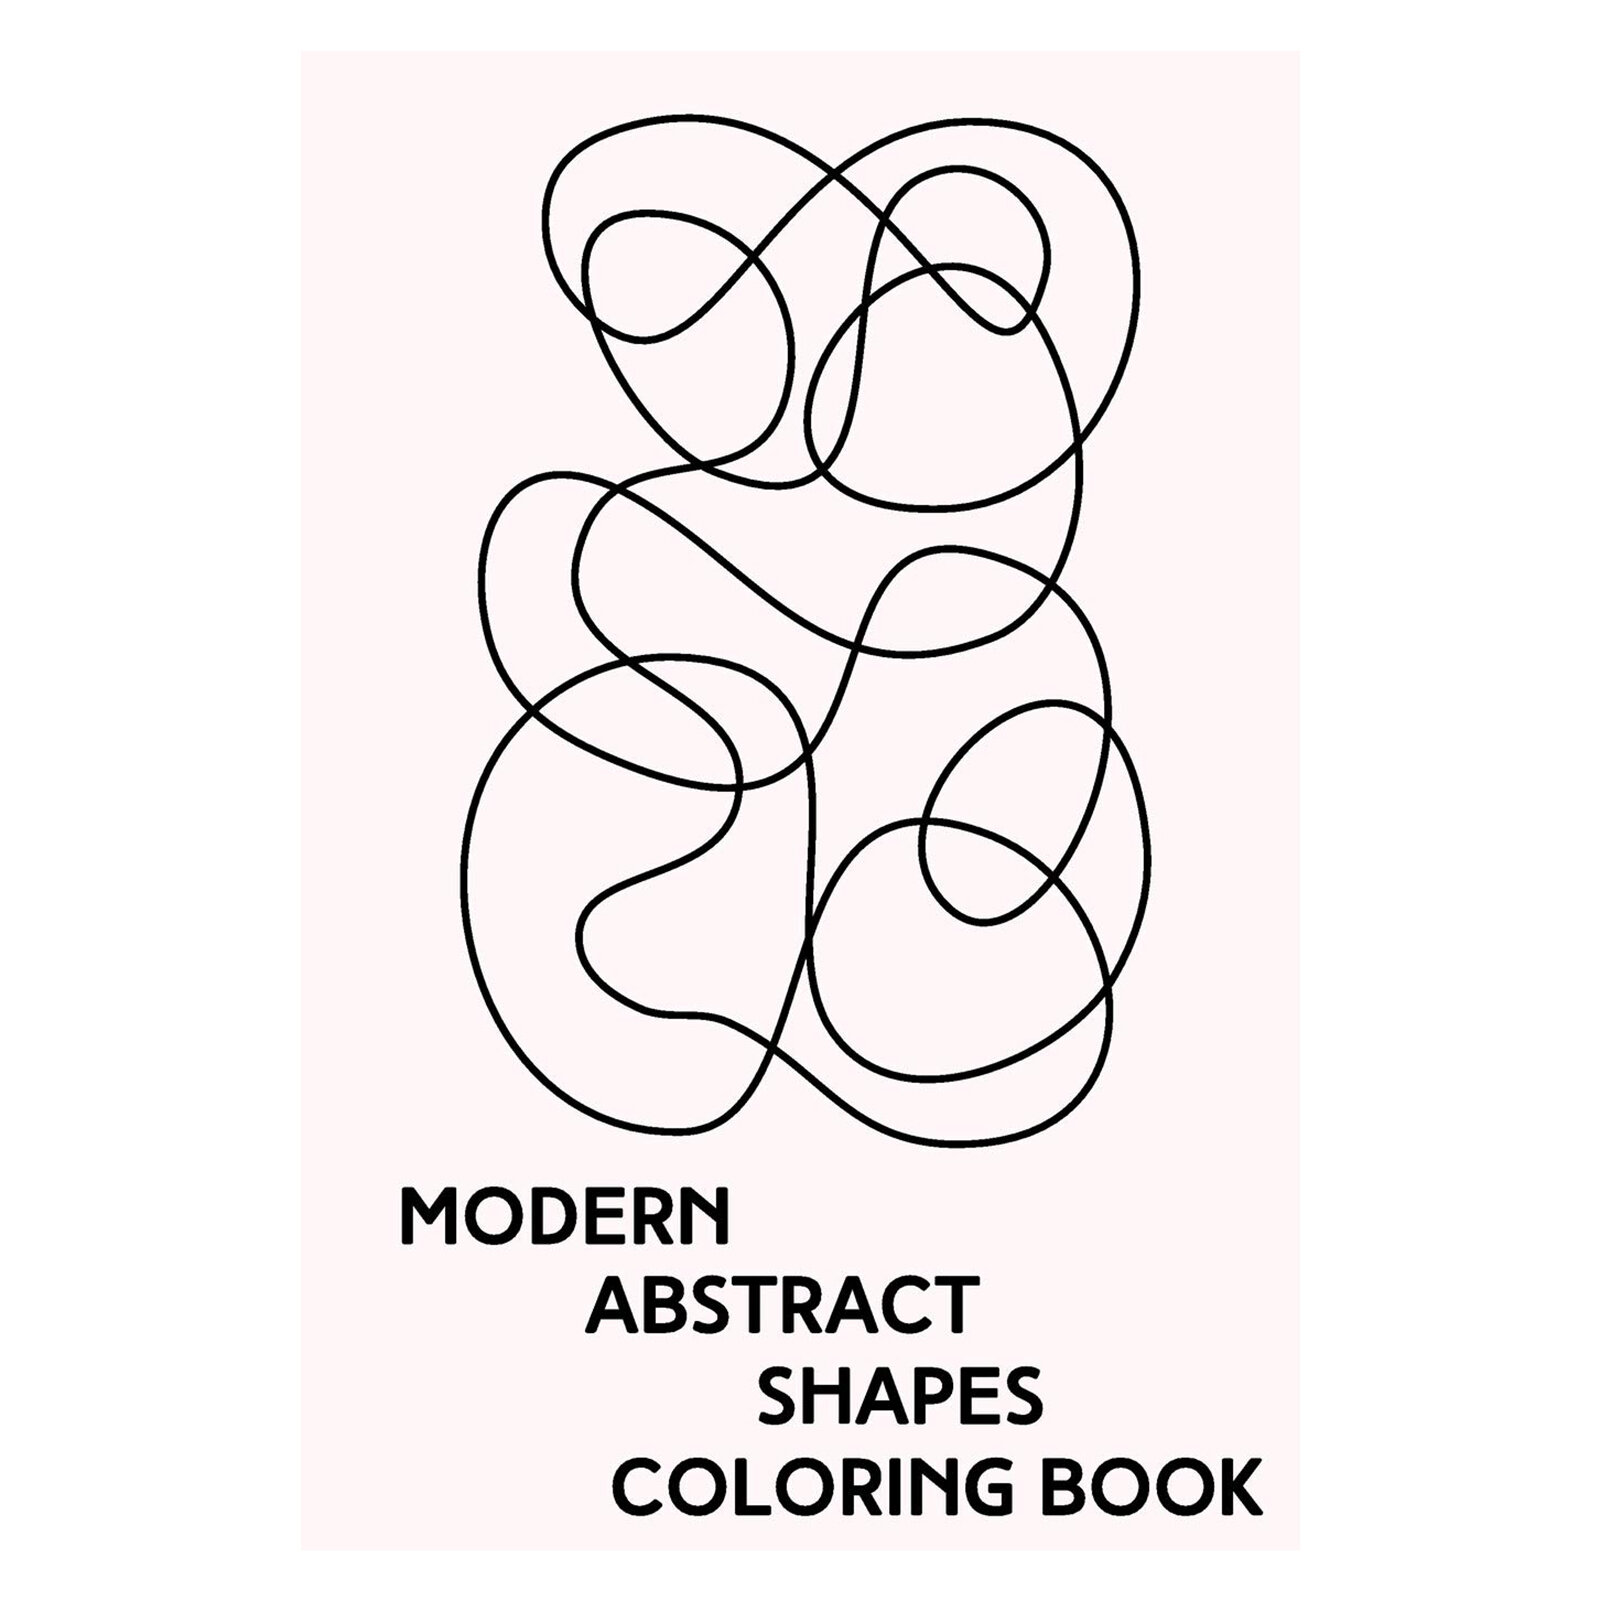 Modern Abstract Shapes Coloring Book,  Agathe Ellery,  $7.99